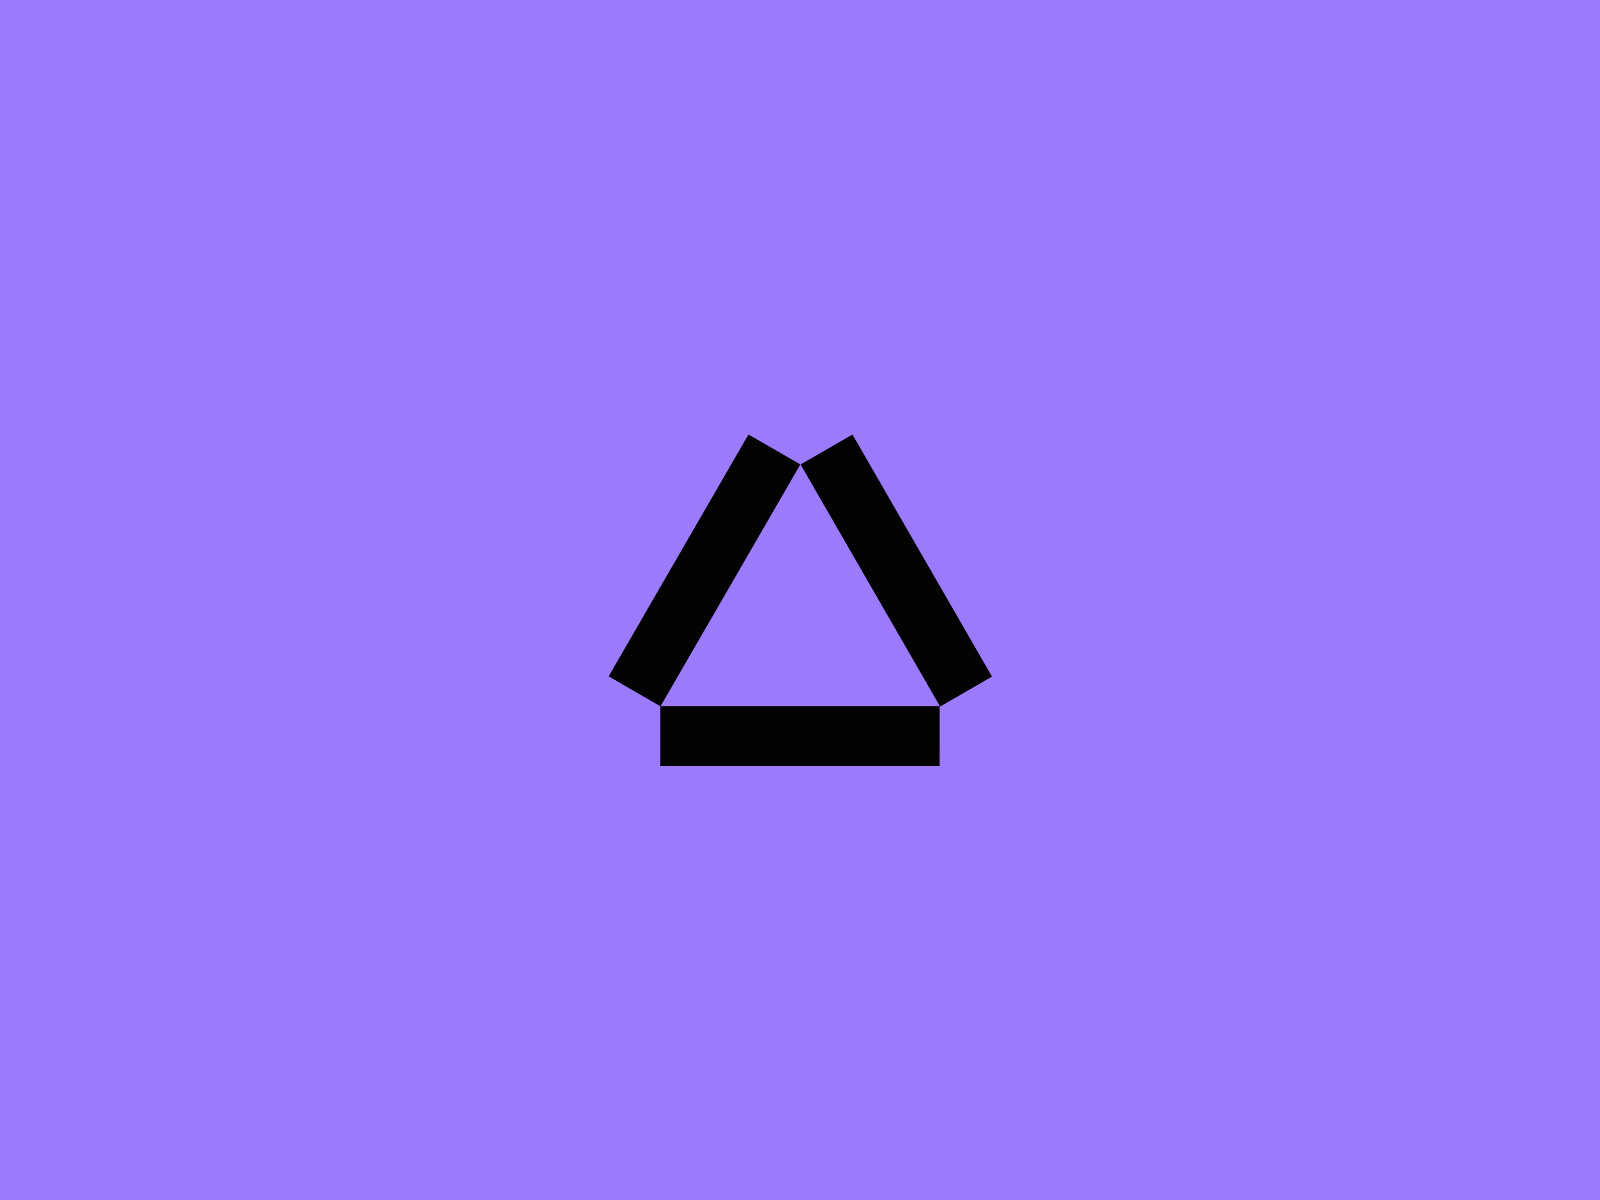 Letter A + Triangle